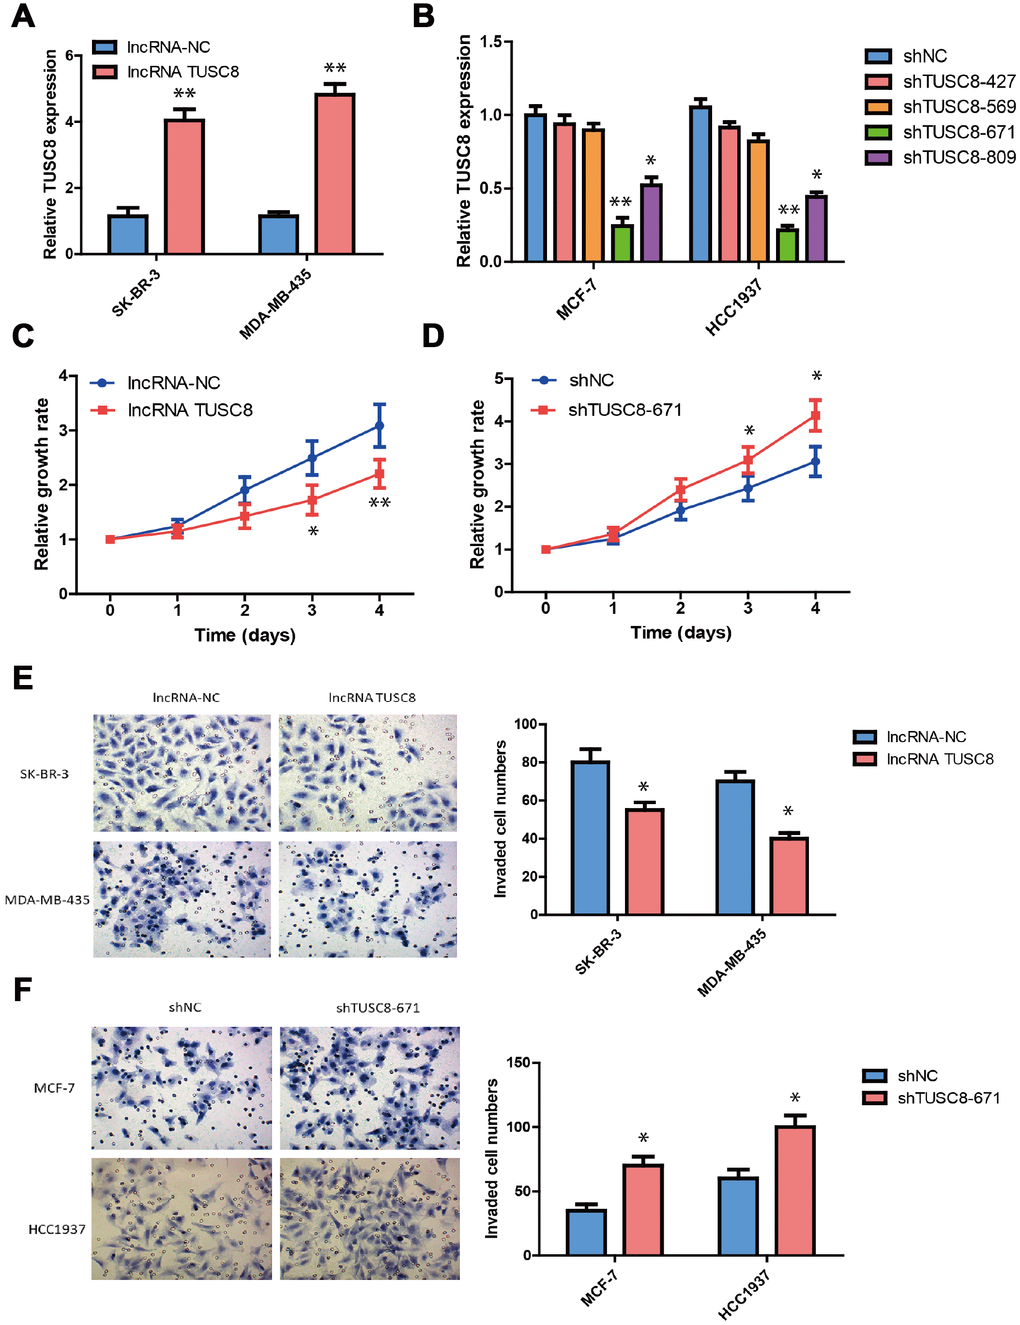 TUSC8 inhibits breast cancer cell growth, invasion and metastasis. (A) The good over-expression efficiency of TUSC8 in breast cancer cell lines SK-BR-3 and MDA-MB-435. (B) The good knock-down efficiency of TUSC8 in breast cancer cell lines MCF-7 and HCC1937 by using different shRNA subclones. (C) Over-expression of TUSC8 significantly suppressed breast cancer cell growth by cell proliferation assay. (D) Knock-down of TUSC8 drastically promoted breast cancer cell growth by cell proliferation assay. (E) Over-expression of TUSC8 reduced the cell invasive capacities in breast cancer cell lines SK-BR-3 and MDA-MB-435 by transwell invasion assay. (F) Knock-down of TUSC8 enhanced the cell invasive capacities in breast cancer cell lines MCF-7 and HCC1937 by transwell invasion assay. The asterisks (*, **) indicate a significant difference (p p 